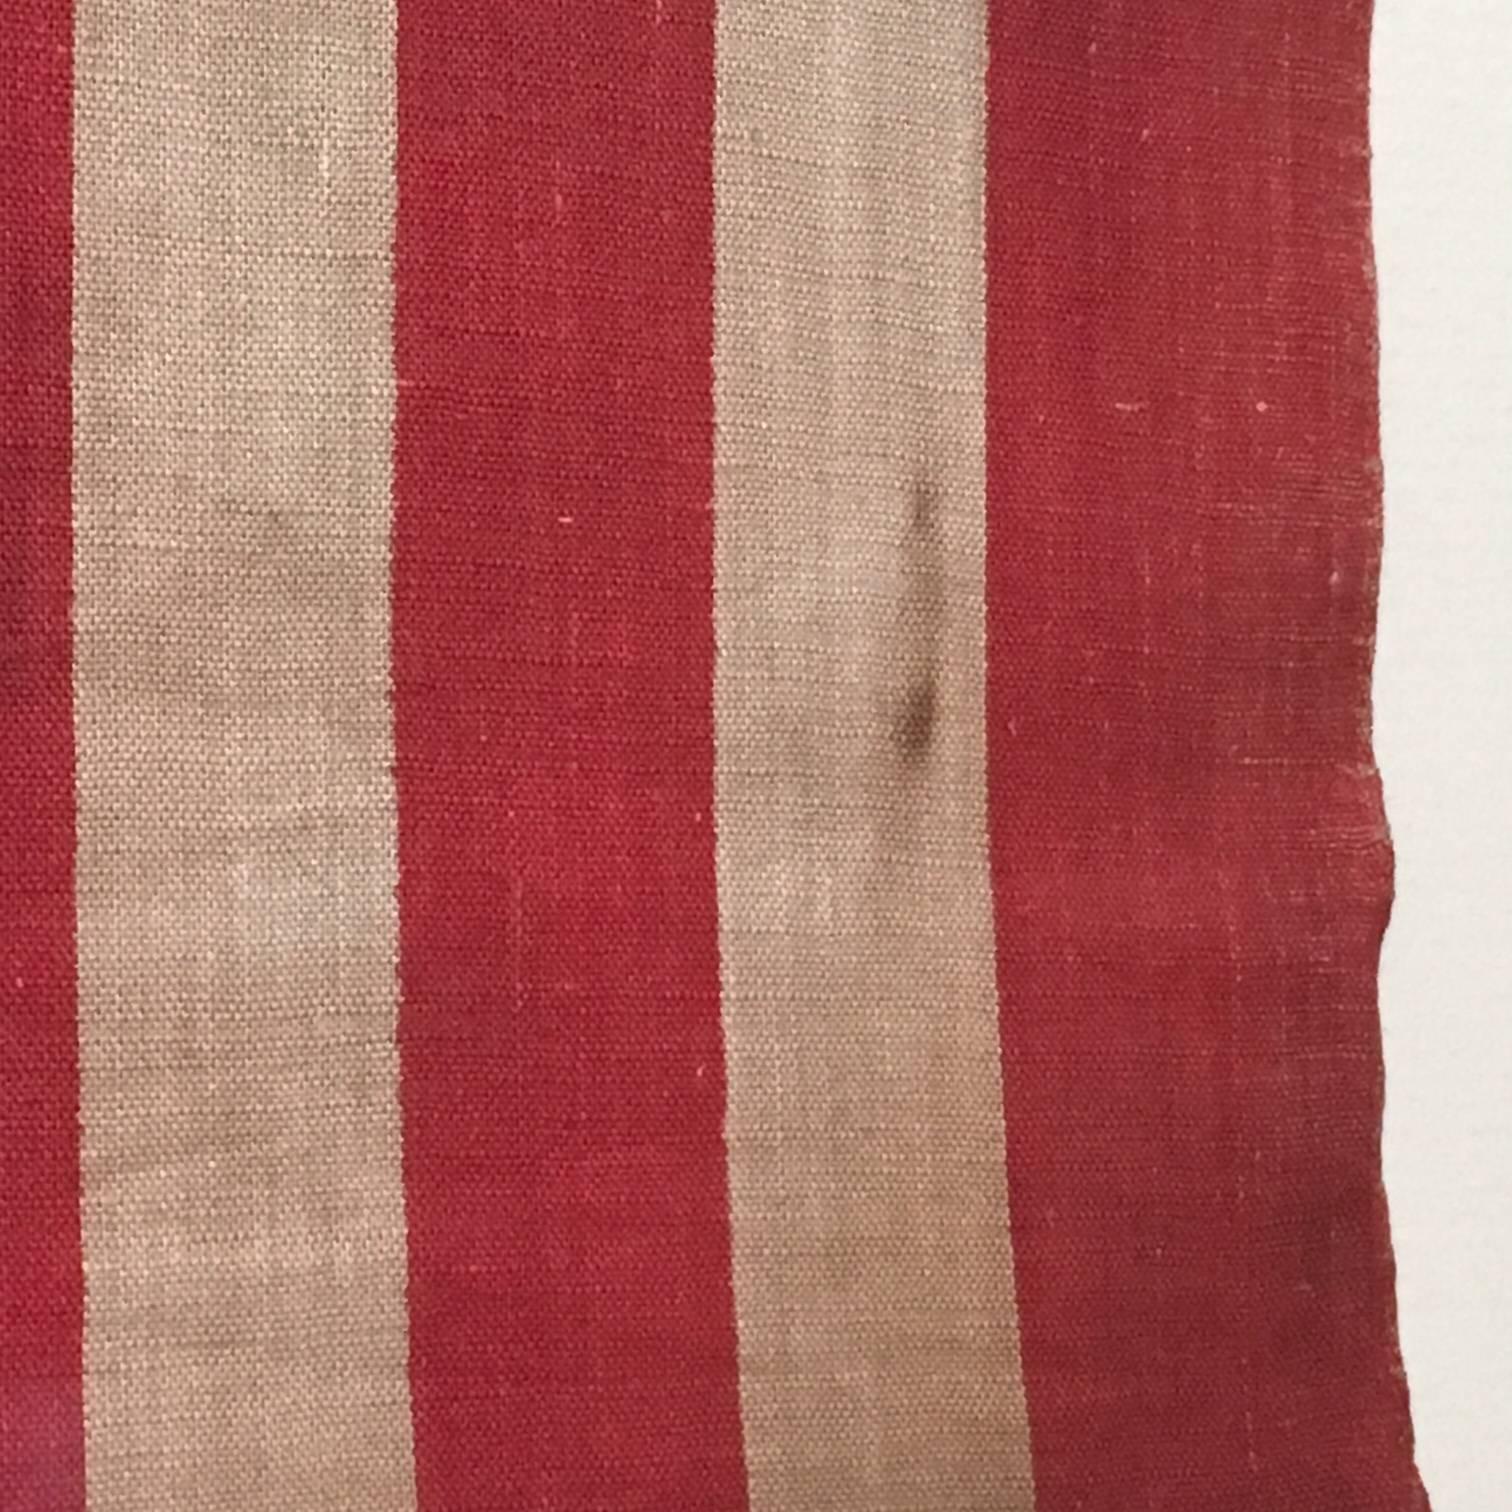 Woven Antique American 46 Star Flag from 1908